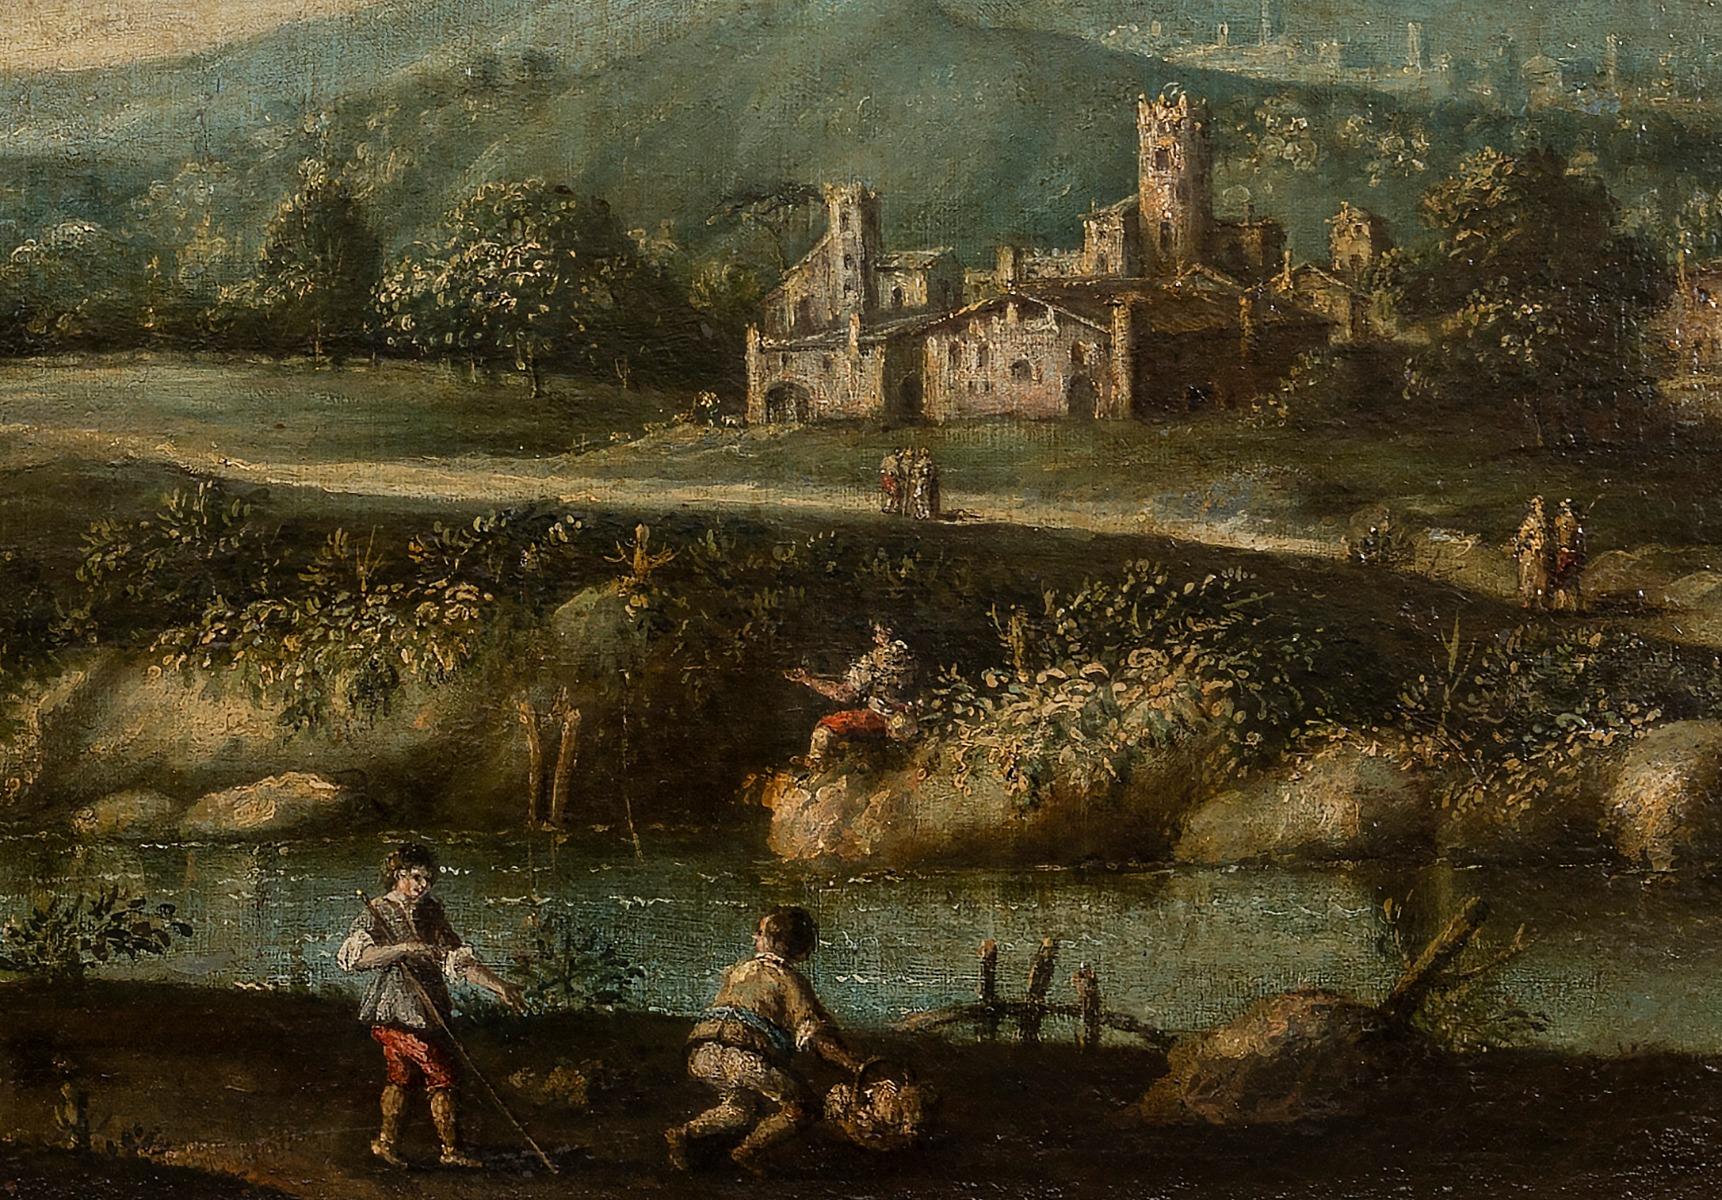 Landscape with figures - Original Oil Paint On Canvas - 18th Century - Painting by Unknown